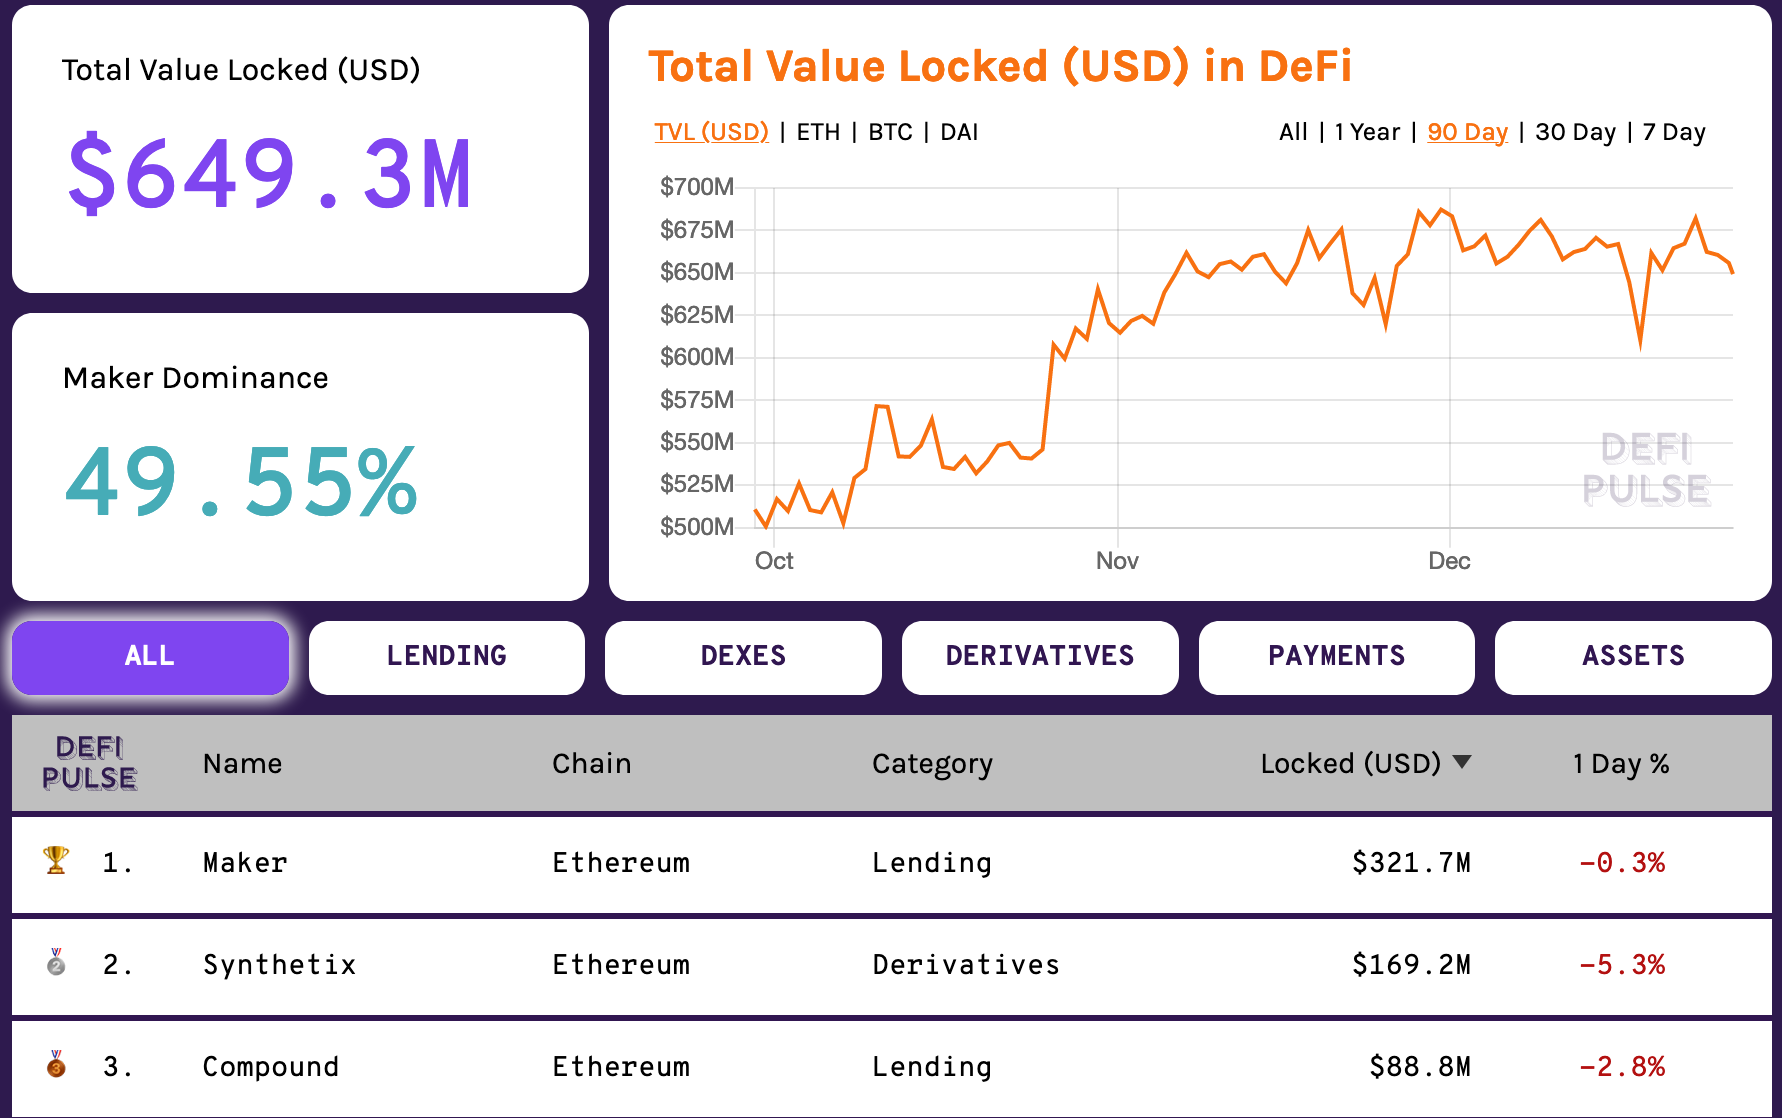 Makerdao Led To Growth In Value Locked In Defi Only To Face Steep - buy robux page danielarnoldfoundationorg